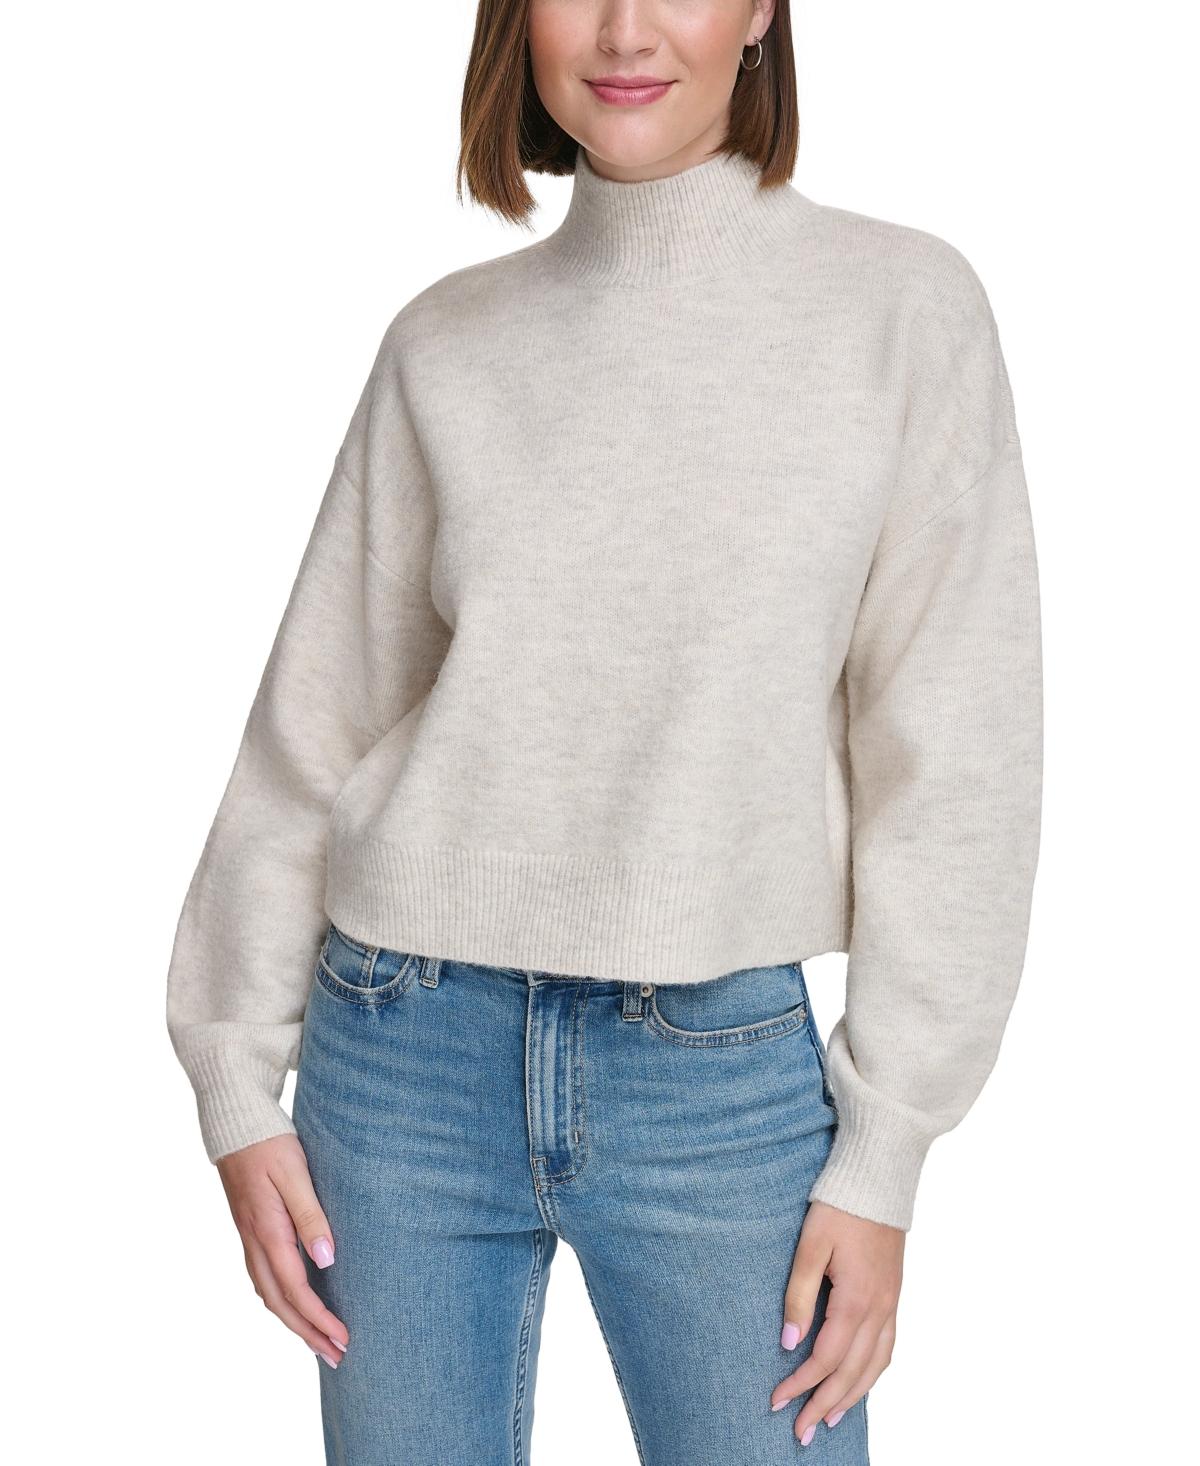 Calvin Klein Boxy in Sleeve Neck Long Mock Lyst Gray Cropped | Sweater